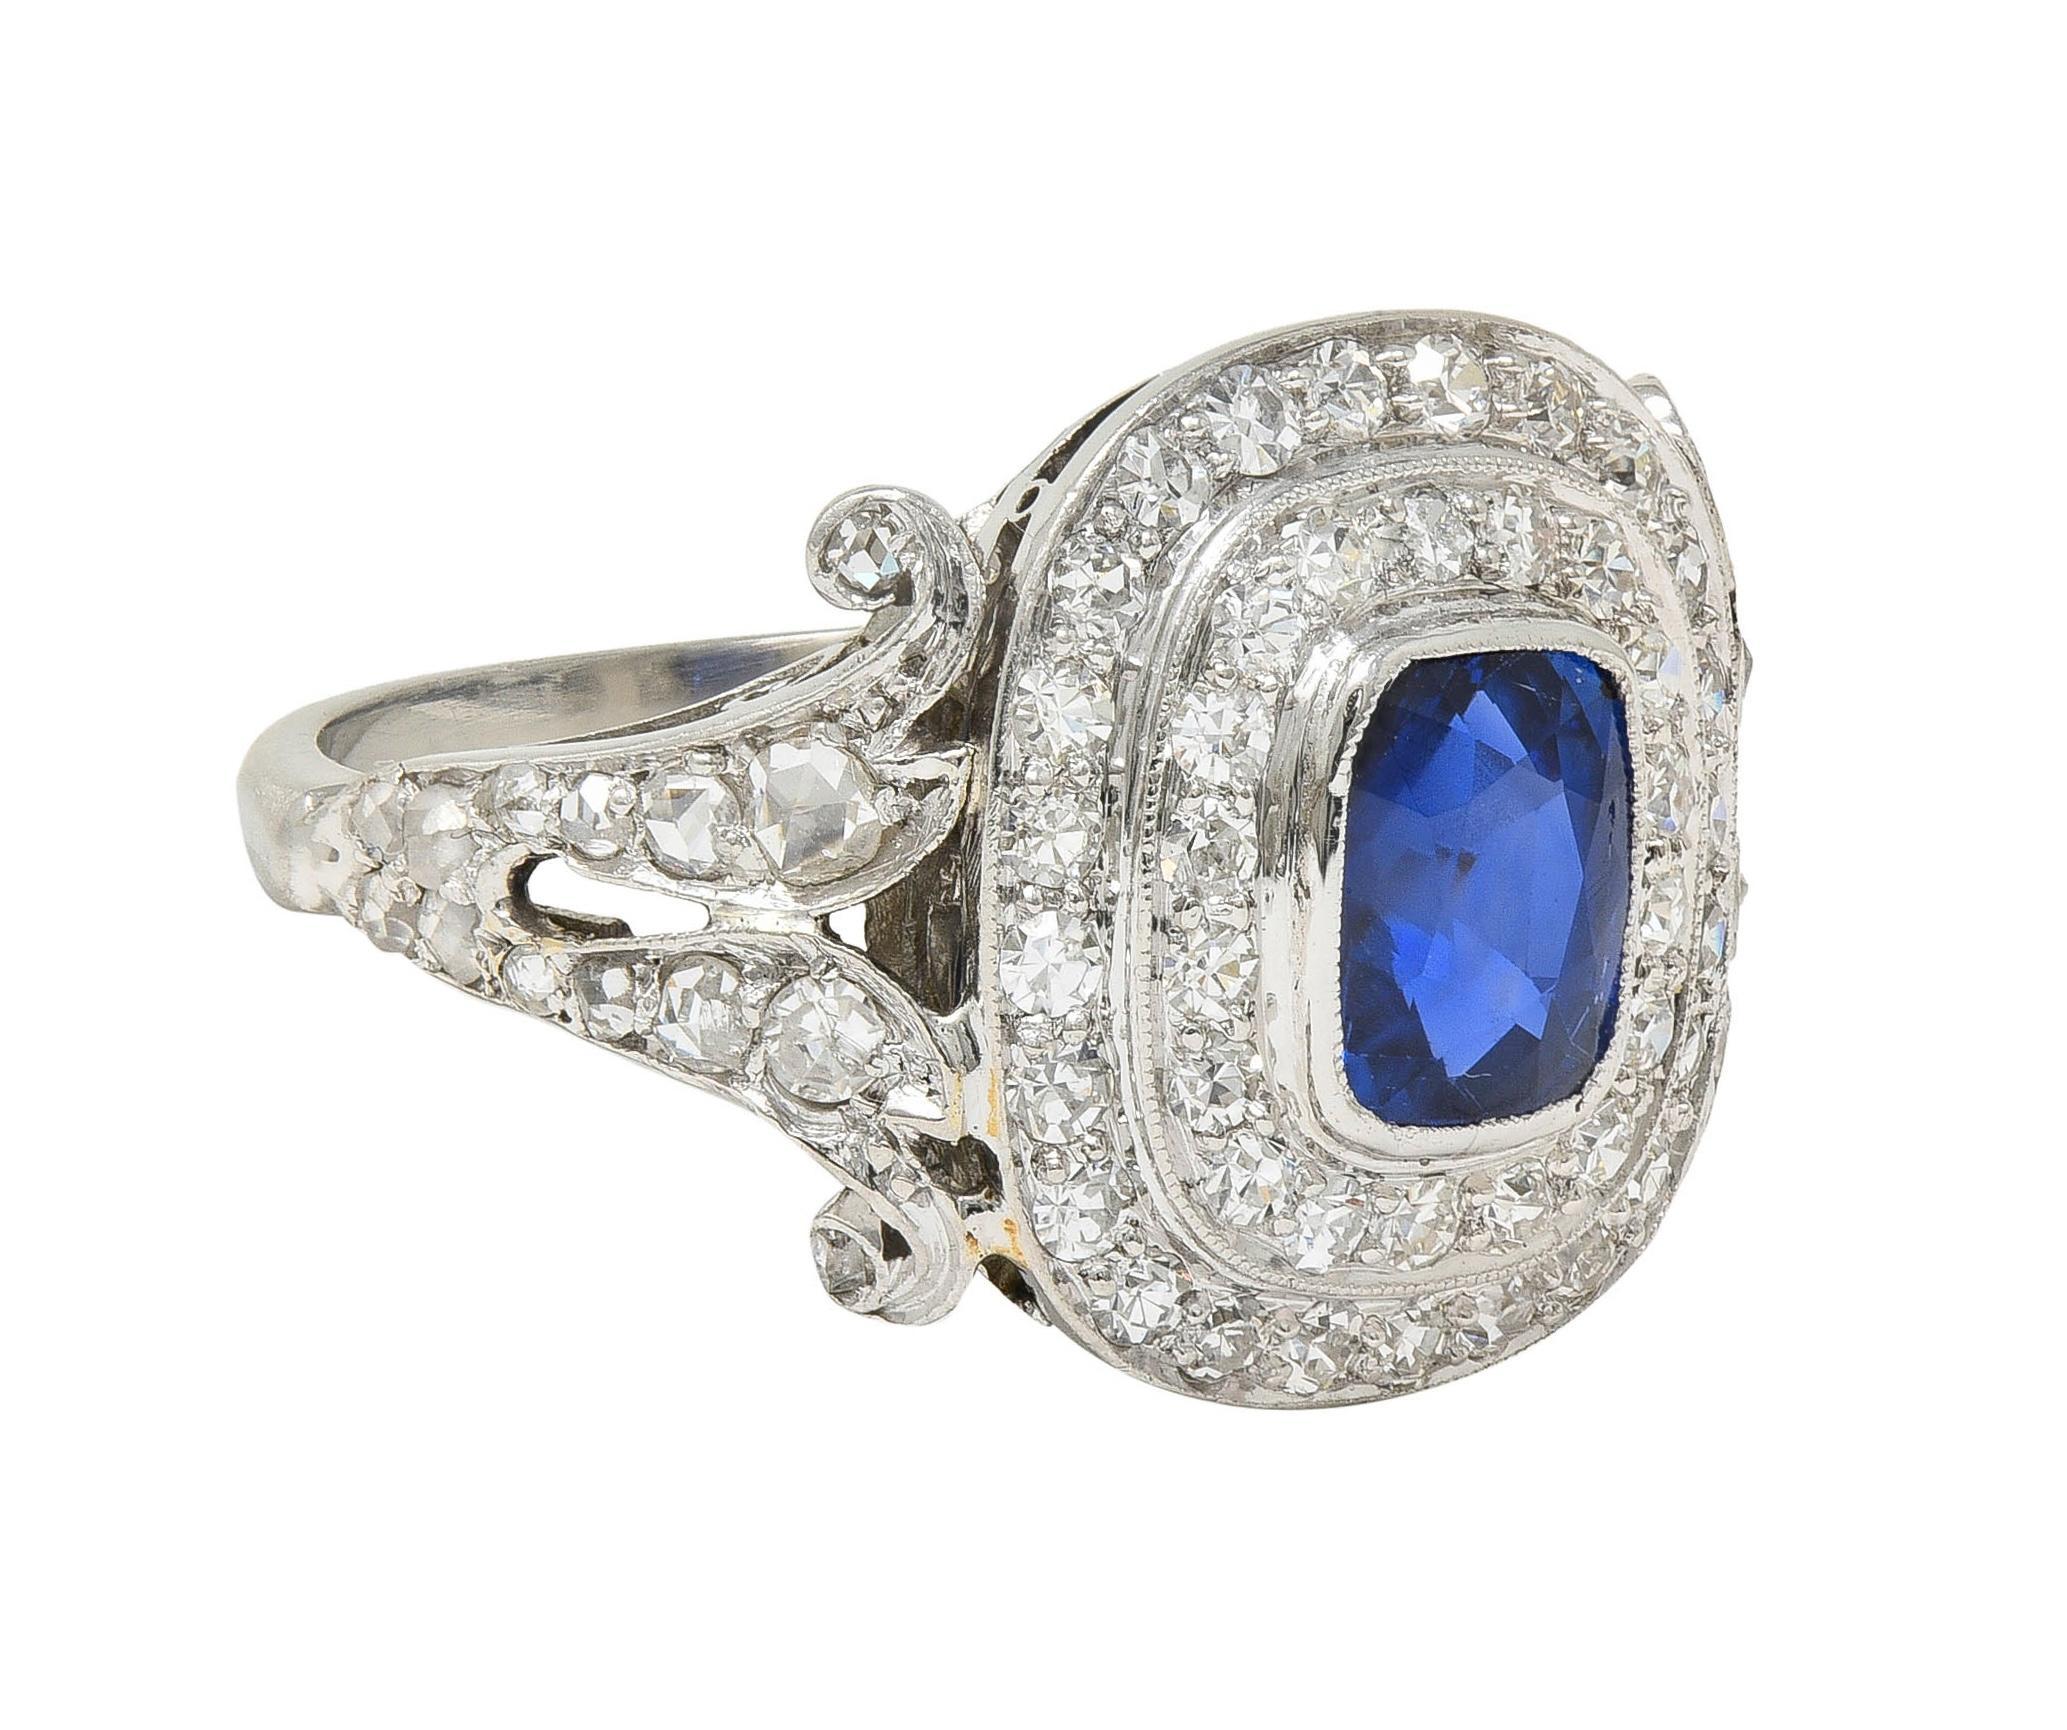 Centering a cushion cut sapphire weighing 1.30 carats - transparent medium blue in color
Natural Burmese in origin and displaying no indications of heat treatment 
Bezel set with a tiered double halo surround of single cut diamonds 
With additional